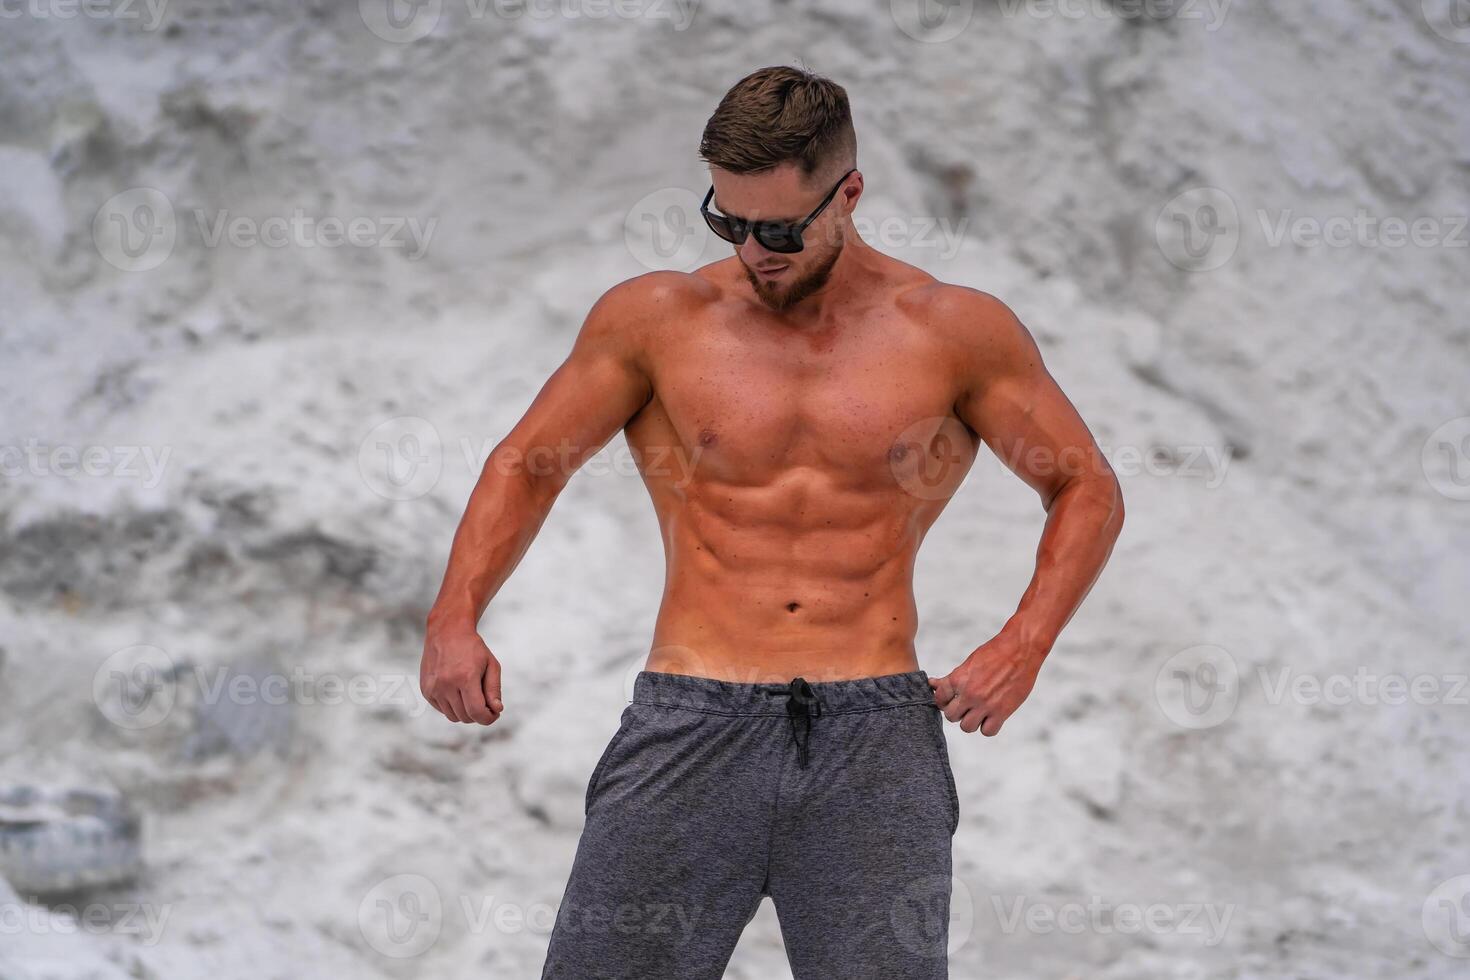 in sunglasses posingoutdoor. Preparing for training in a quarry. Photoshoot in white mountains. Strong attractive bodybuilder. Lifestyle. White landscape. photo